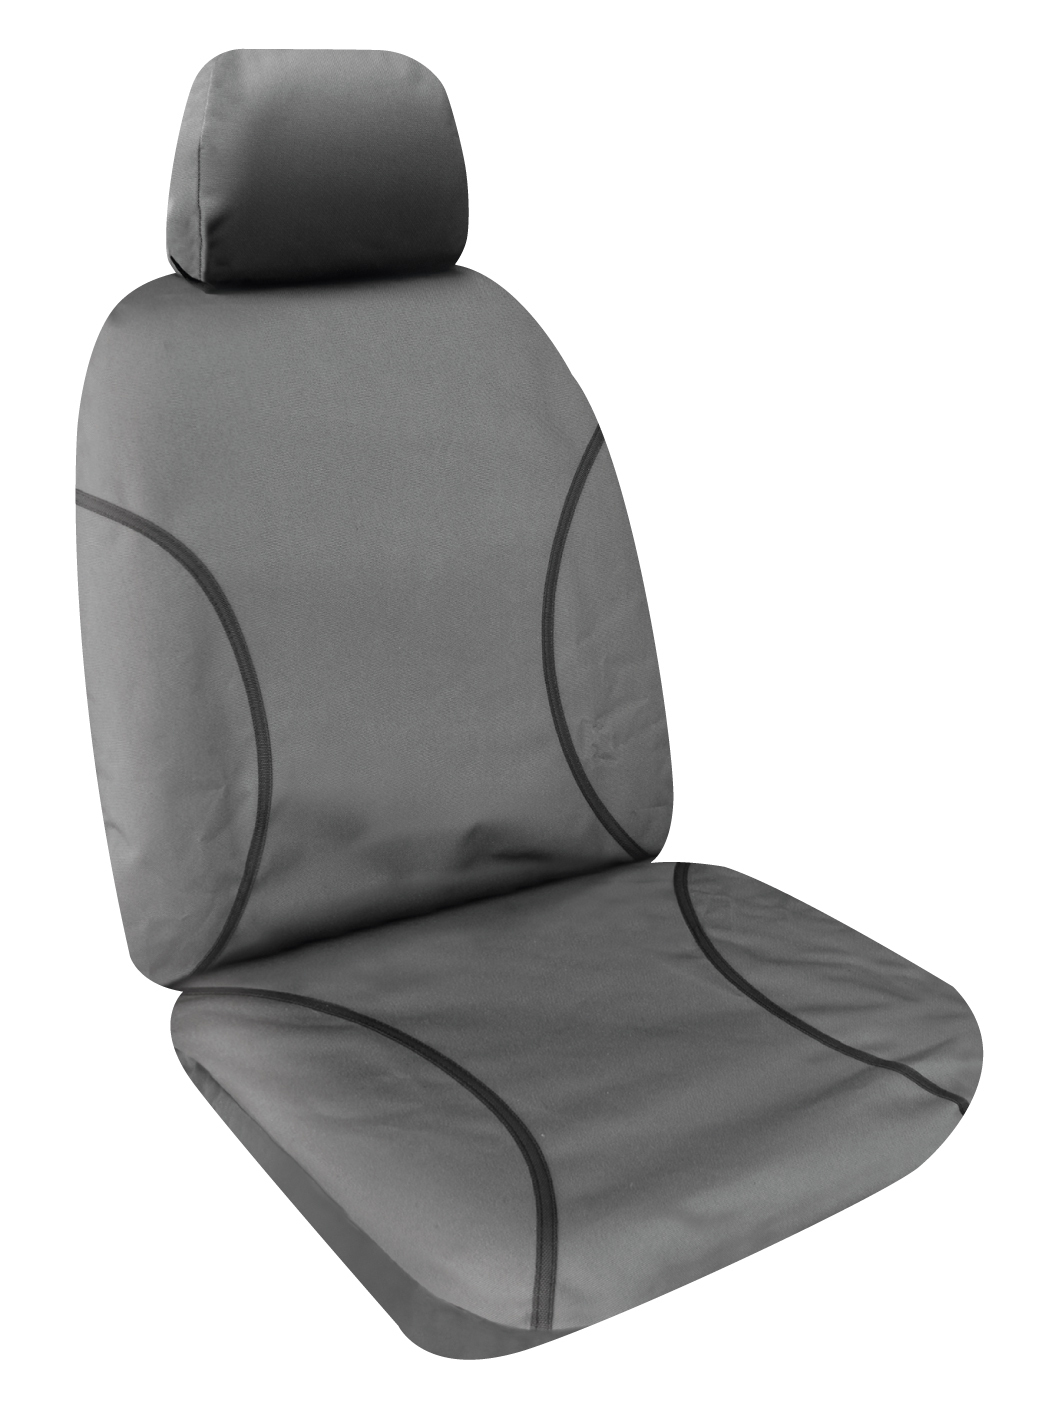 SPERLING SEAT COVER MIDDLE TRG (TRADIES CANVAS GREY)